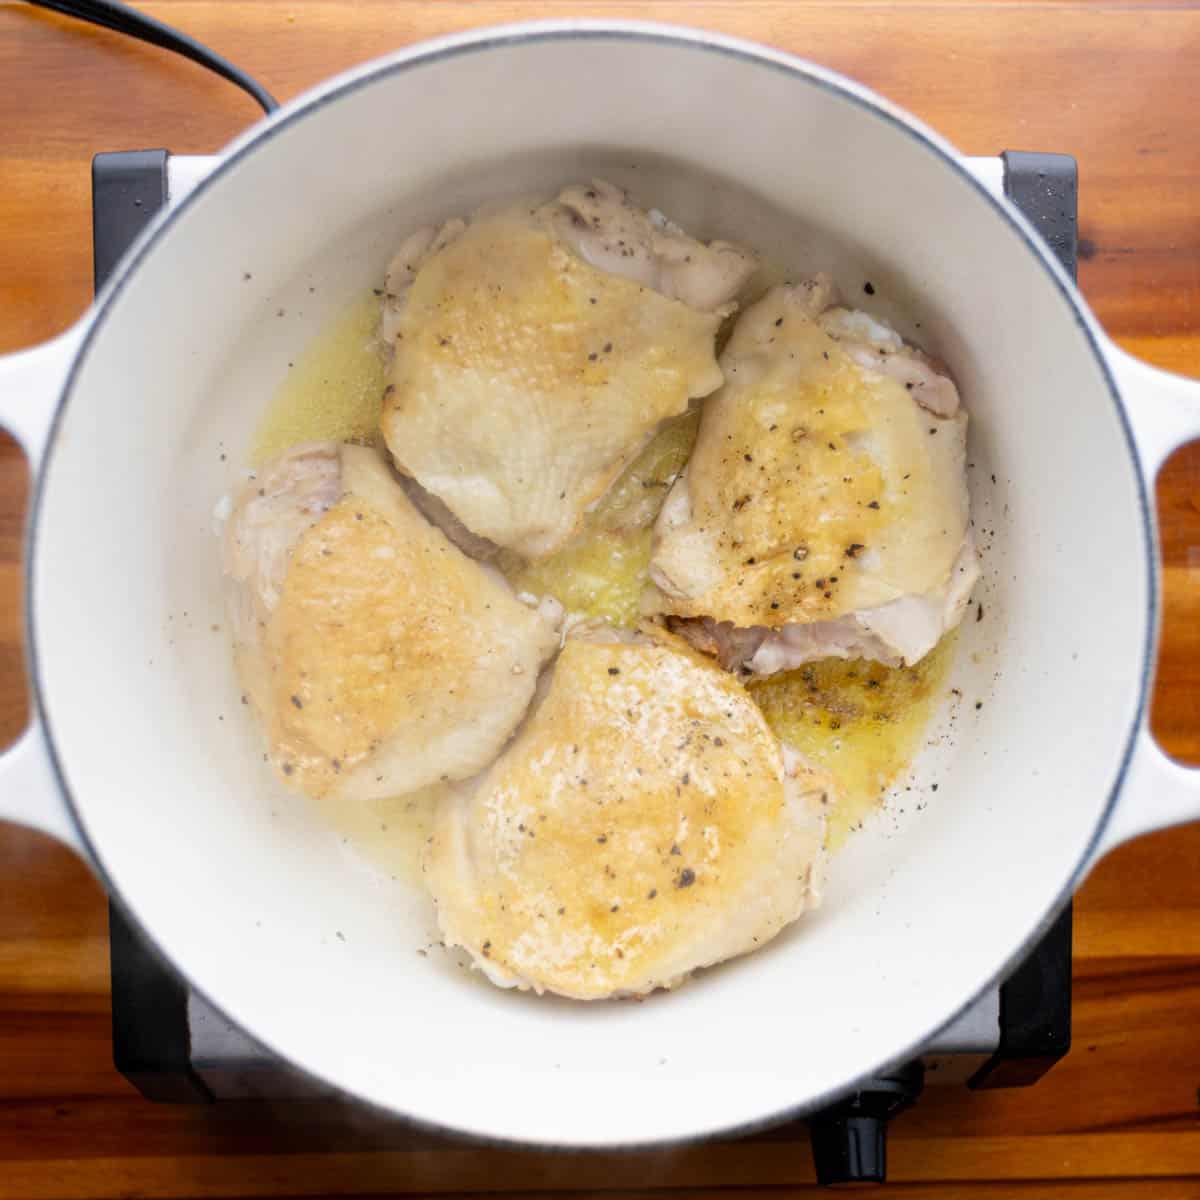 Heat oil in a large Dutch oven; cook the chicken until brown on all sides. Transfer the browned chicken to a plate.